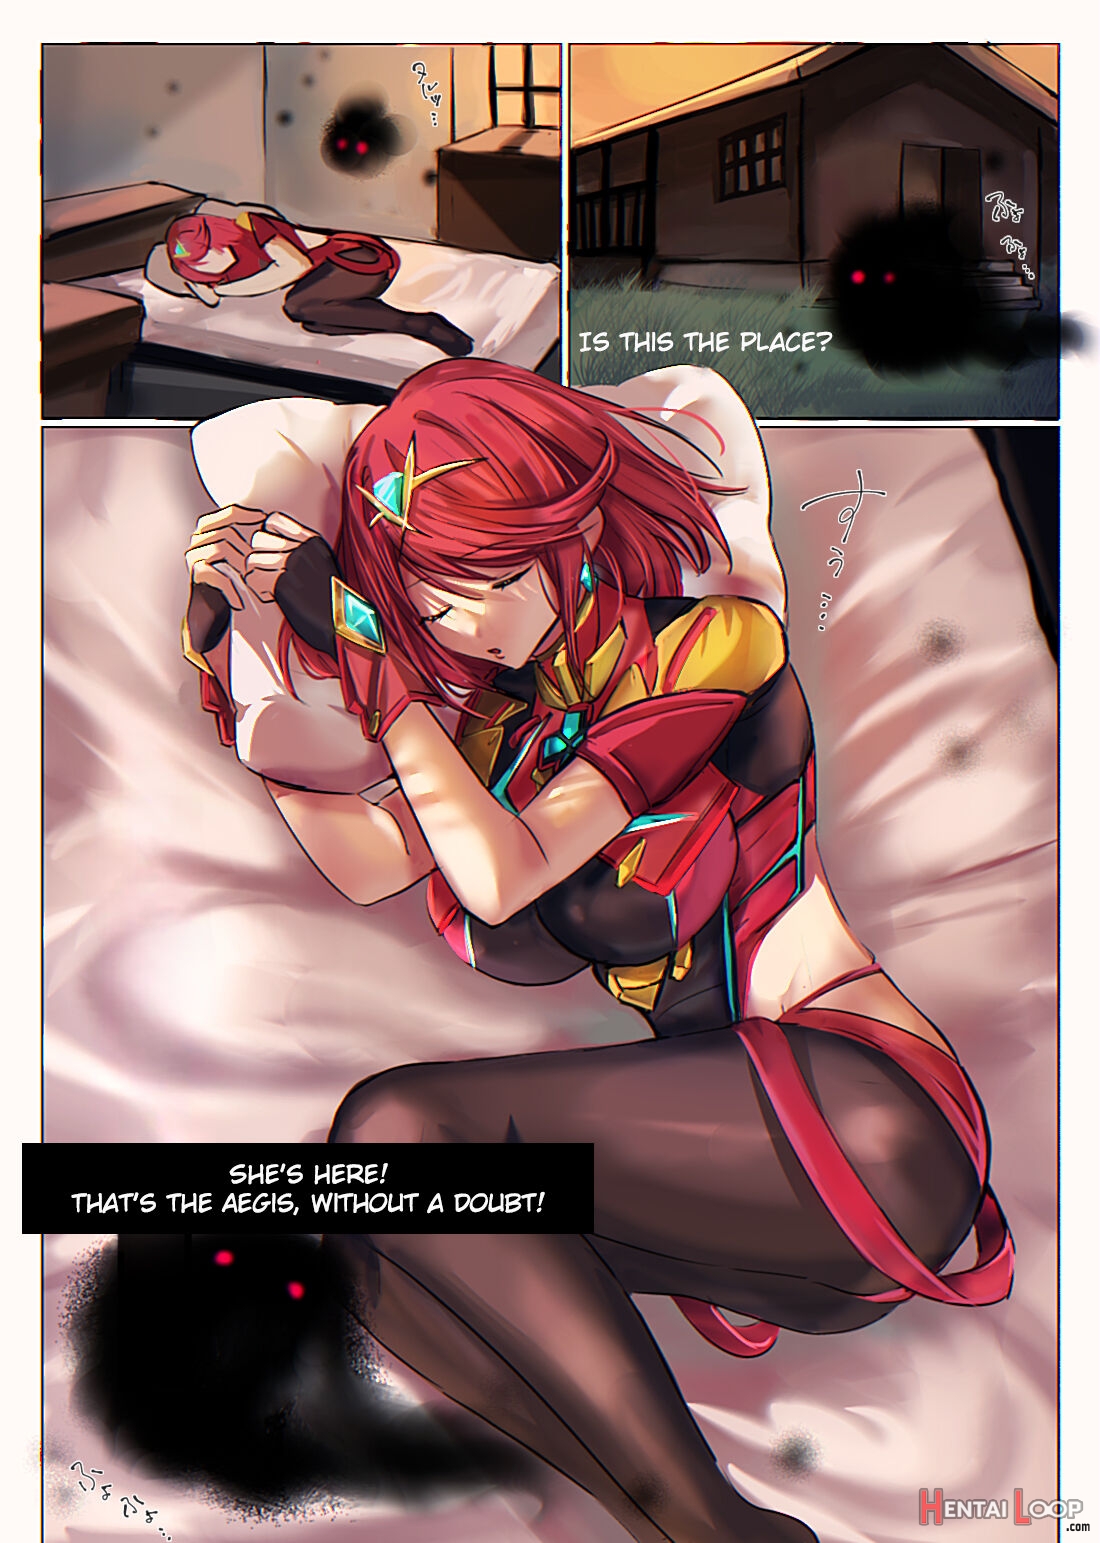 Possessing Pyra And Mythra page 1